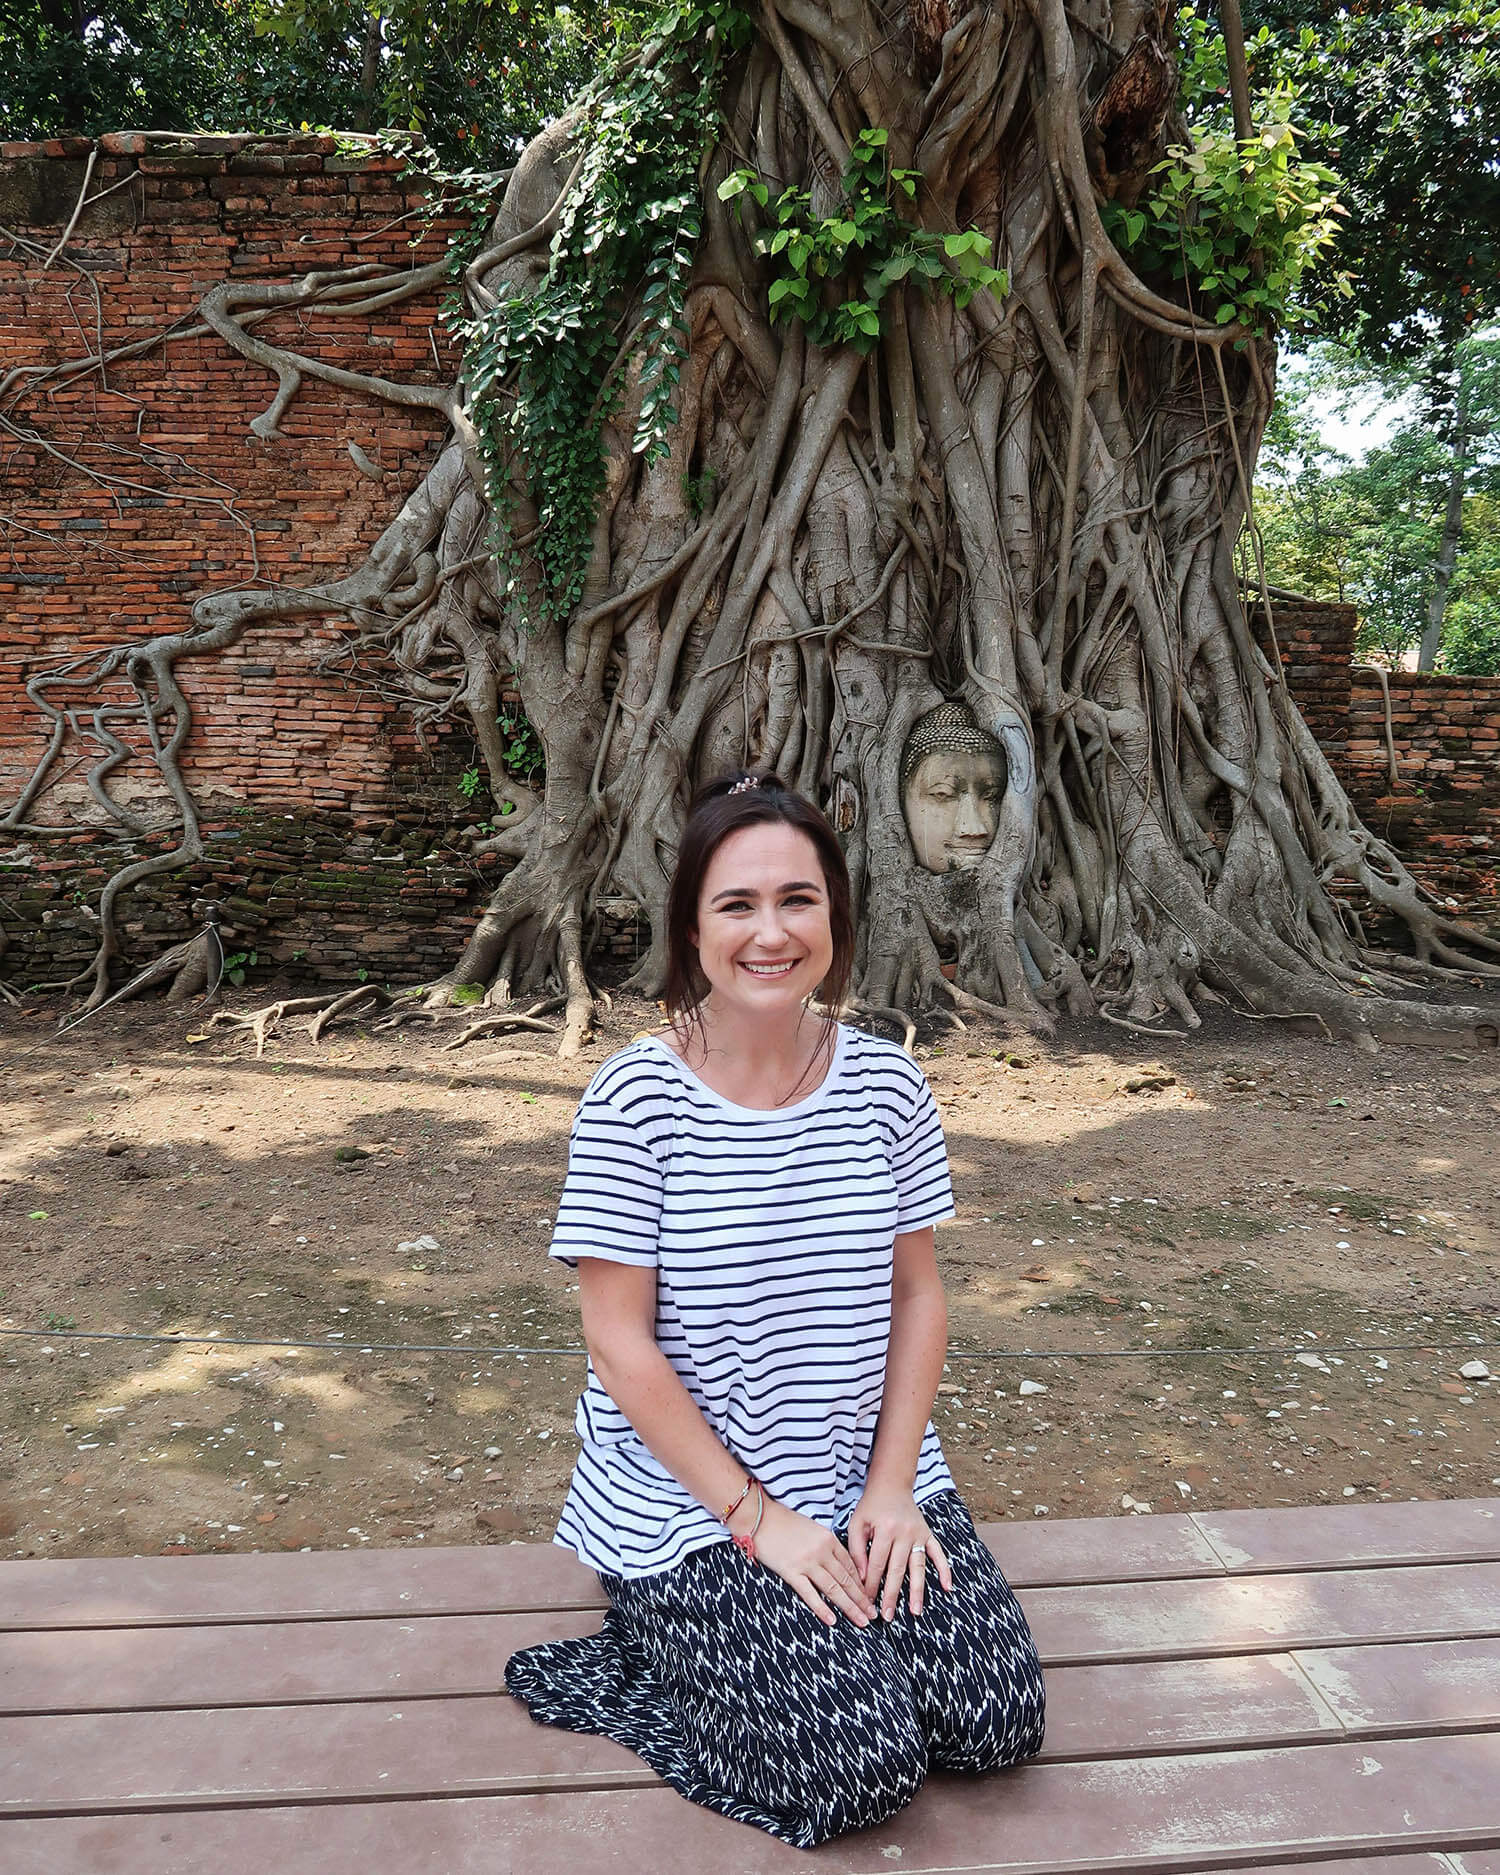 Photo of woman kneeling on wooden platform in front of a tree with large visible roots and the statue of a buddha head